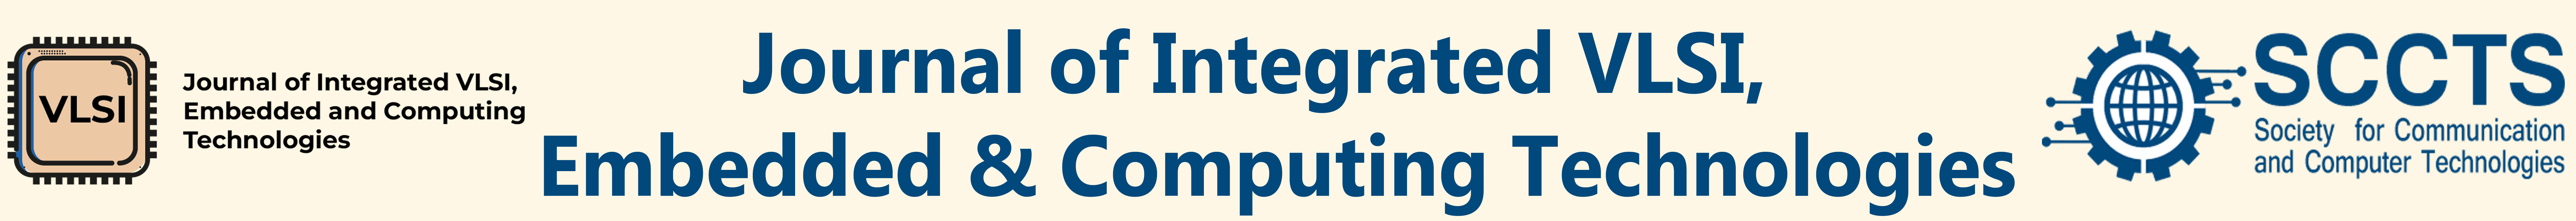 Journal of Integrated VLSI, Embedded and Computing Technologies